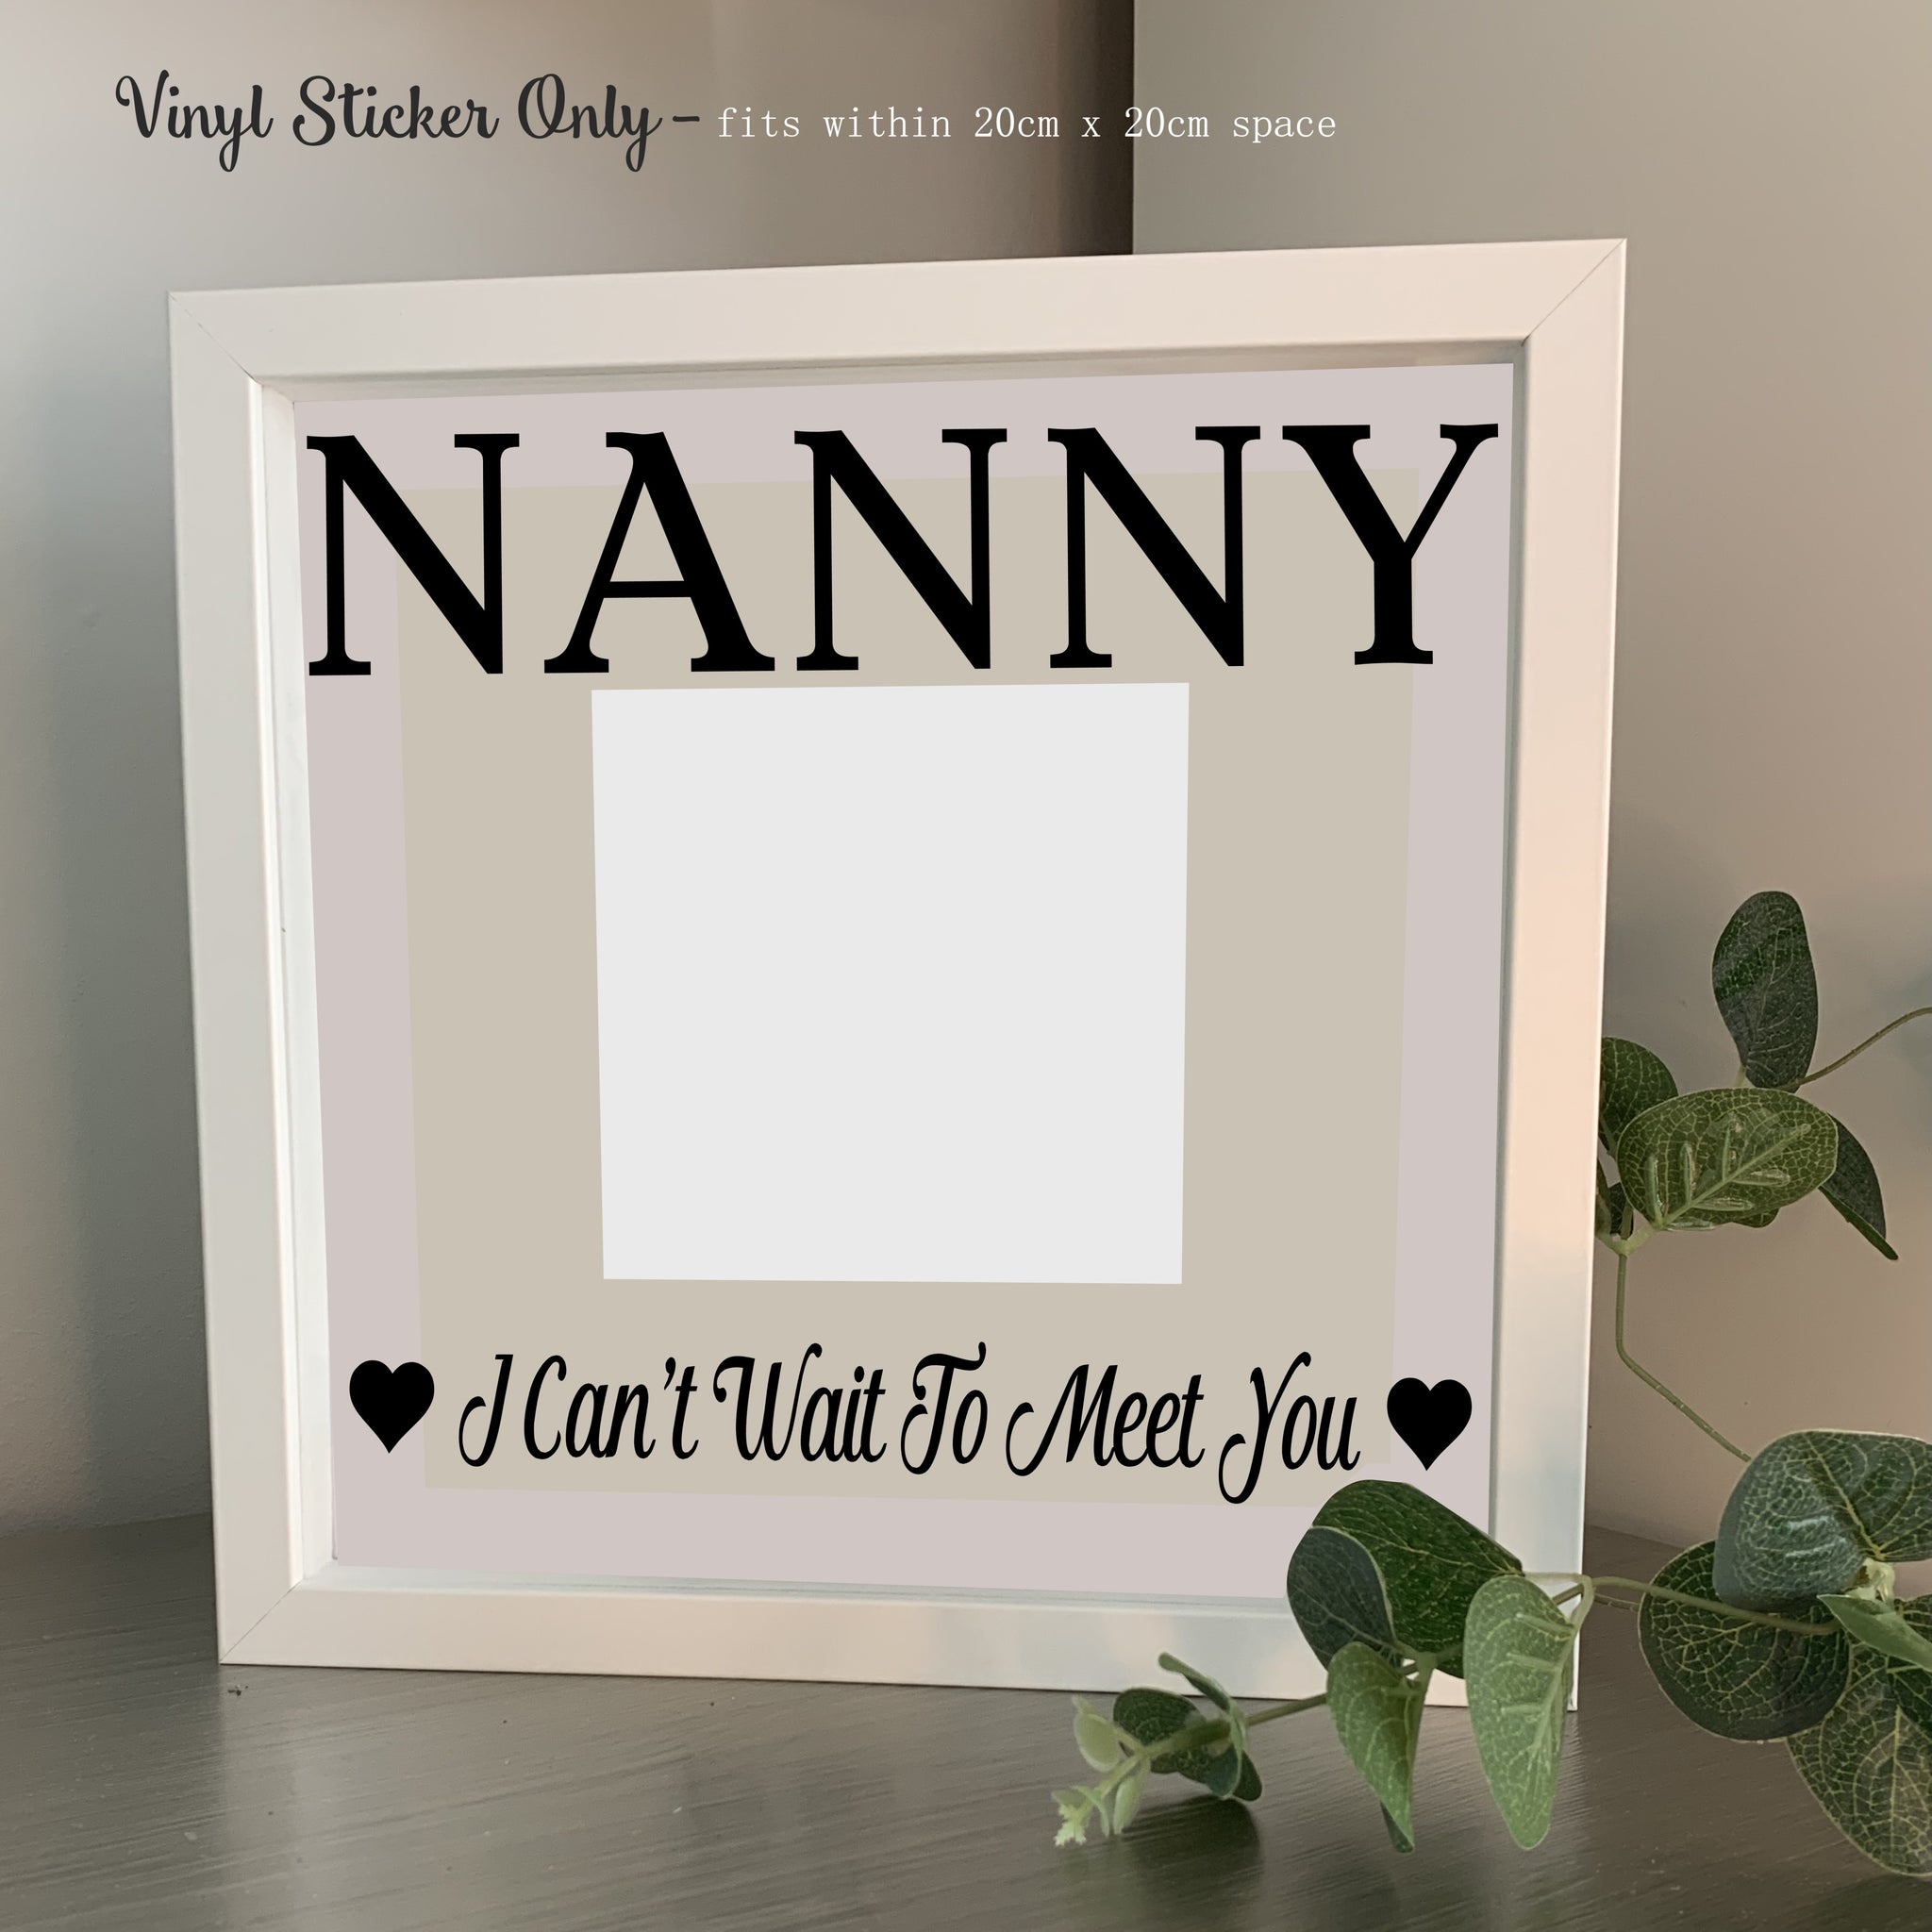 Nanny I can't wait to me you | Die cut vinyl sticker